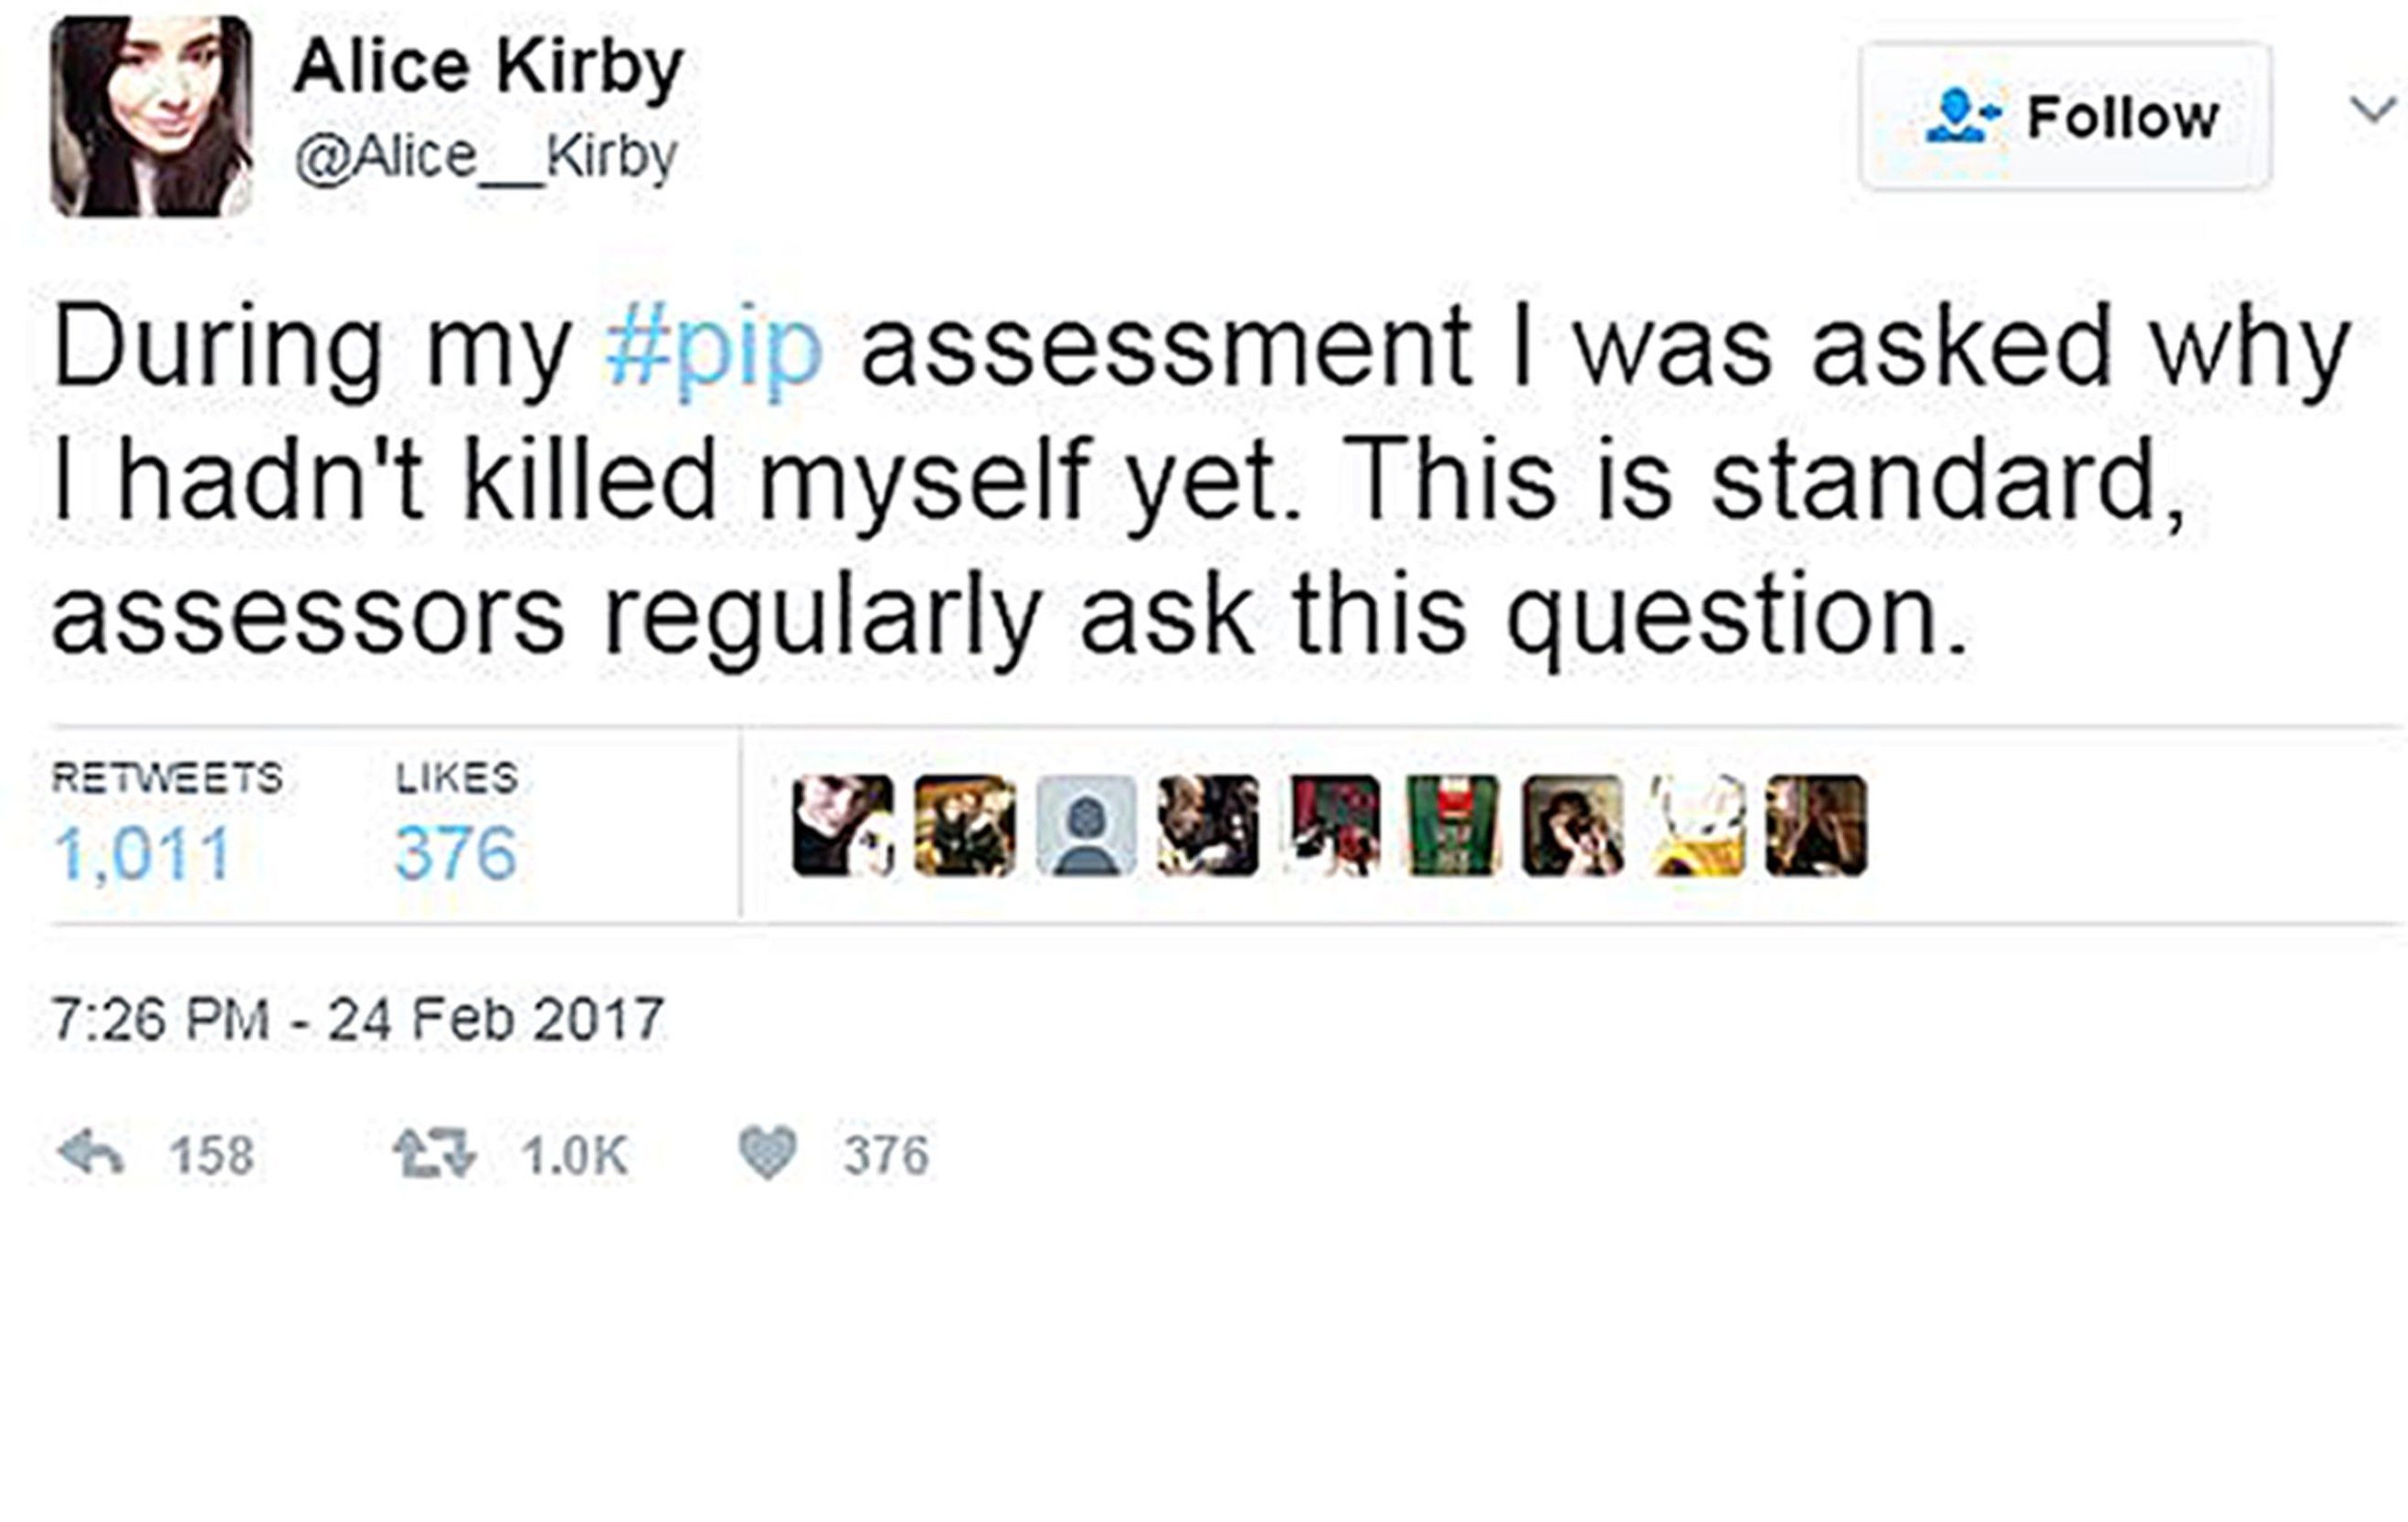 Image taken from the Twitter page of Alice Kirby claiming she was asked why she had not killed herself as part of her assessment for disability benefits. (Alice Kirby/Twitter/PA Wire)